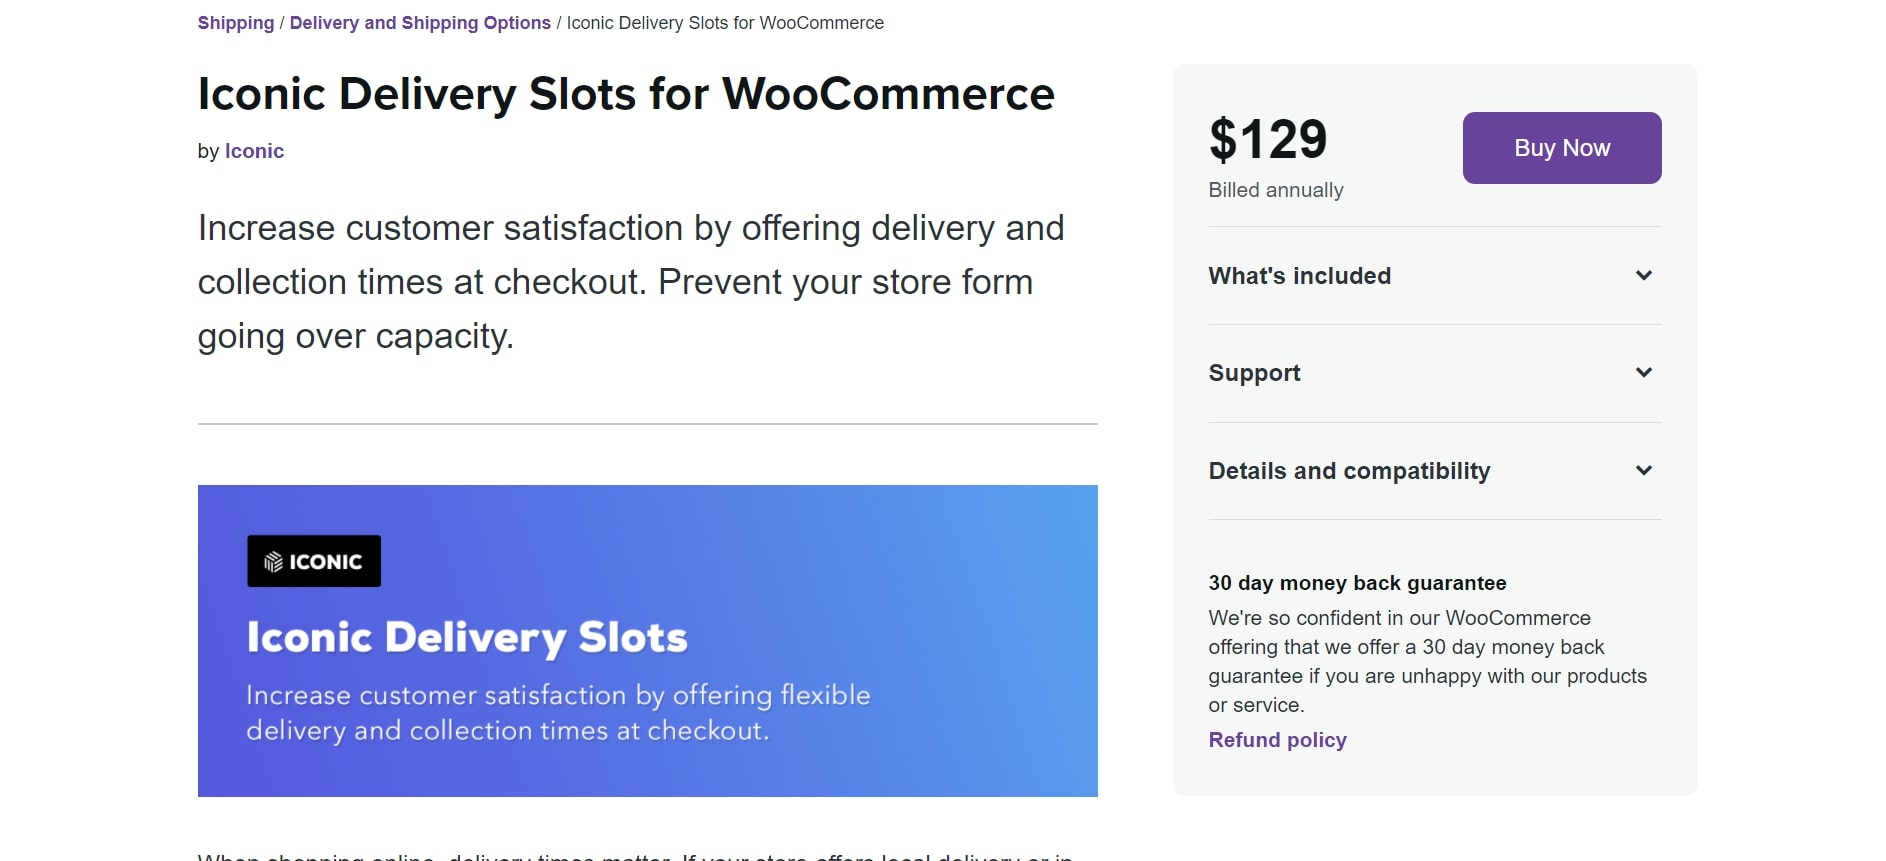 Delivery Slots for WooCommerce